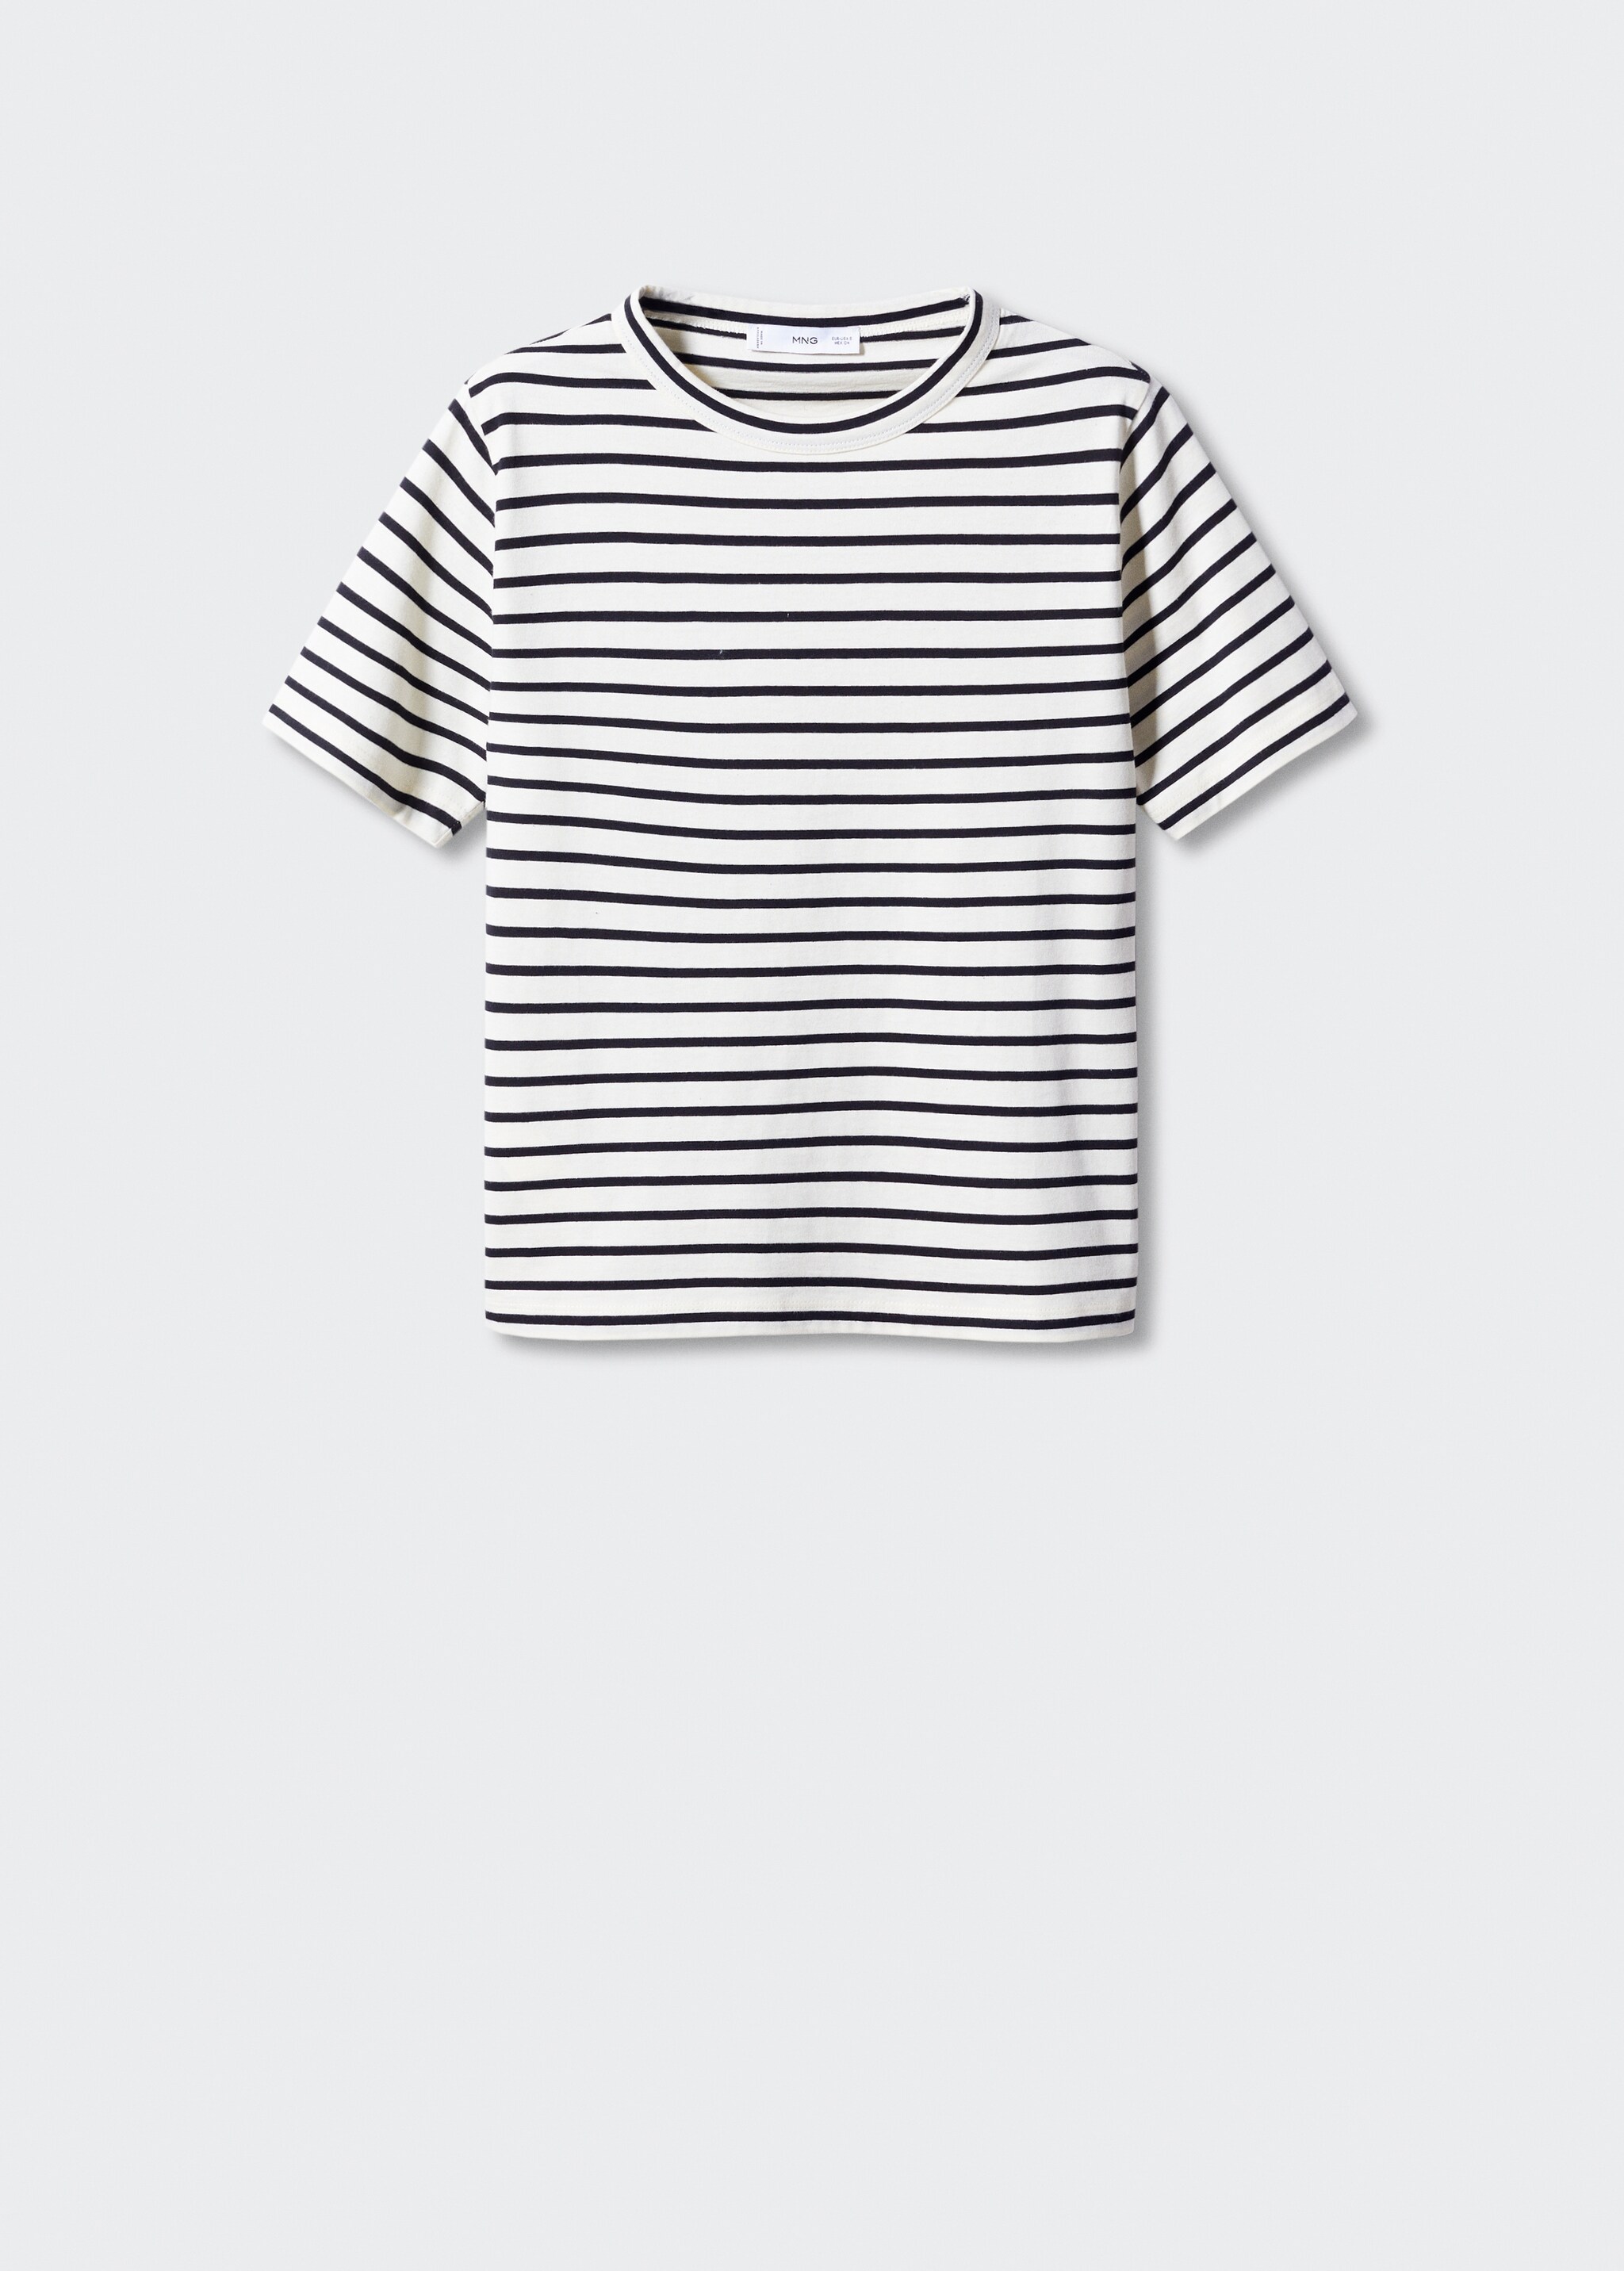 Striped cotton T-shirt - Article without model